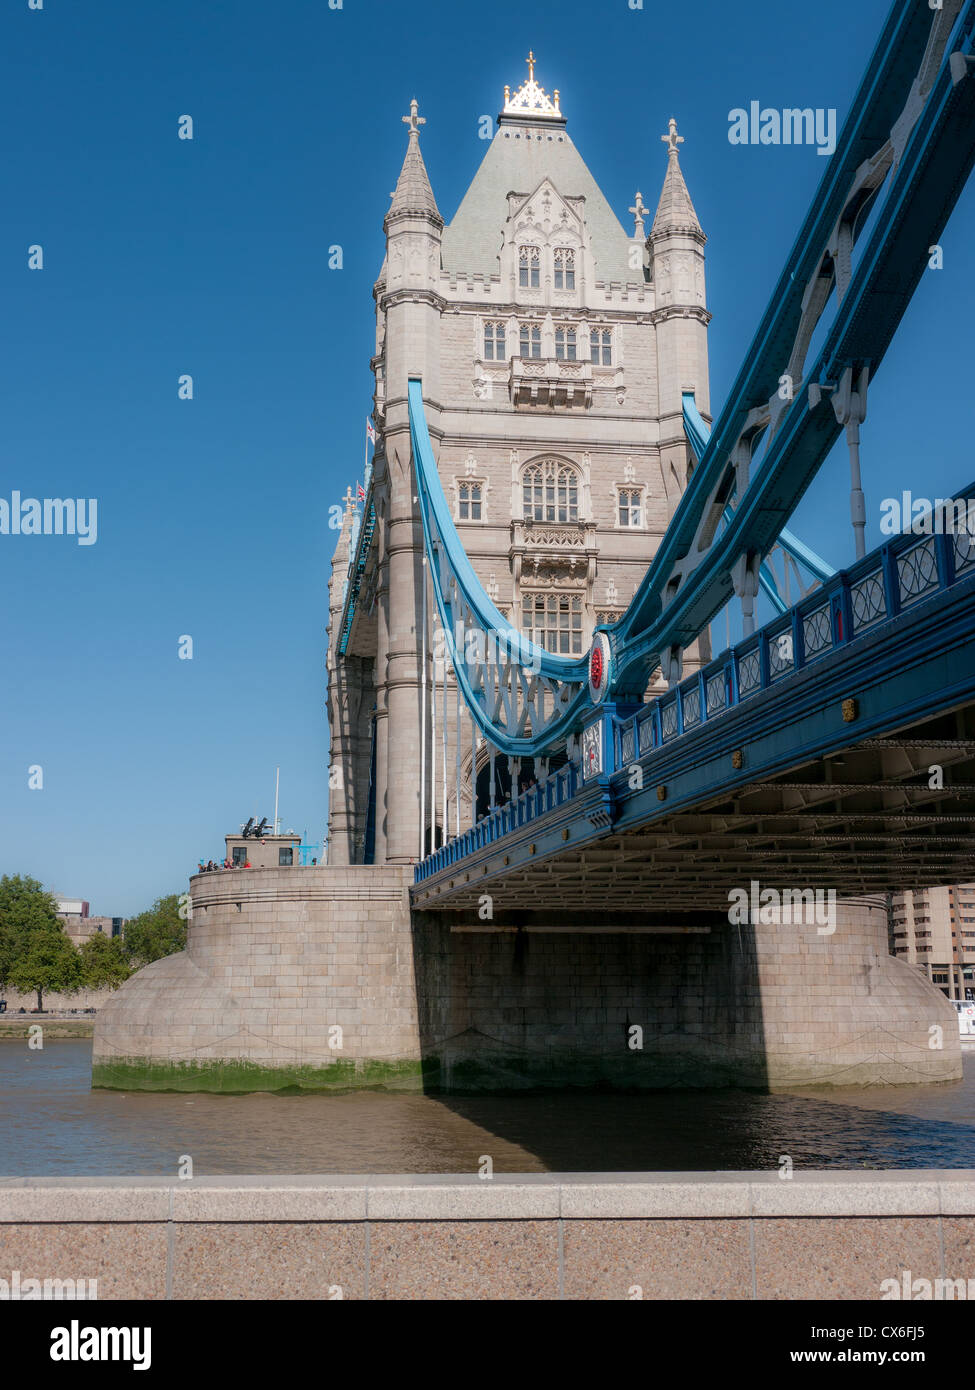 View of the North Tower of Tower Bridge from the South Bank London, UK Stock Photo